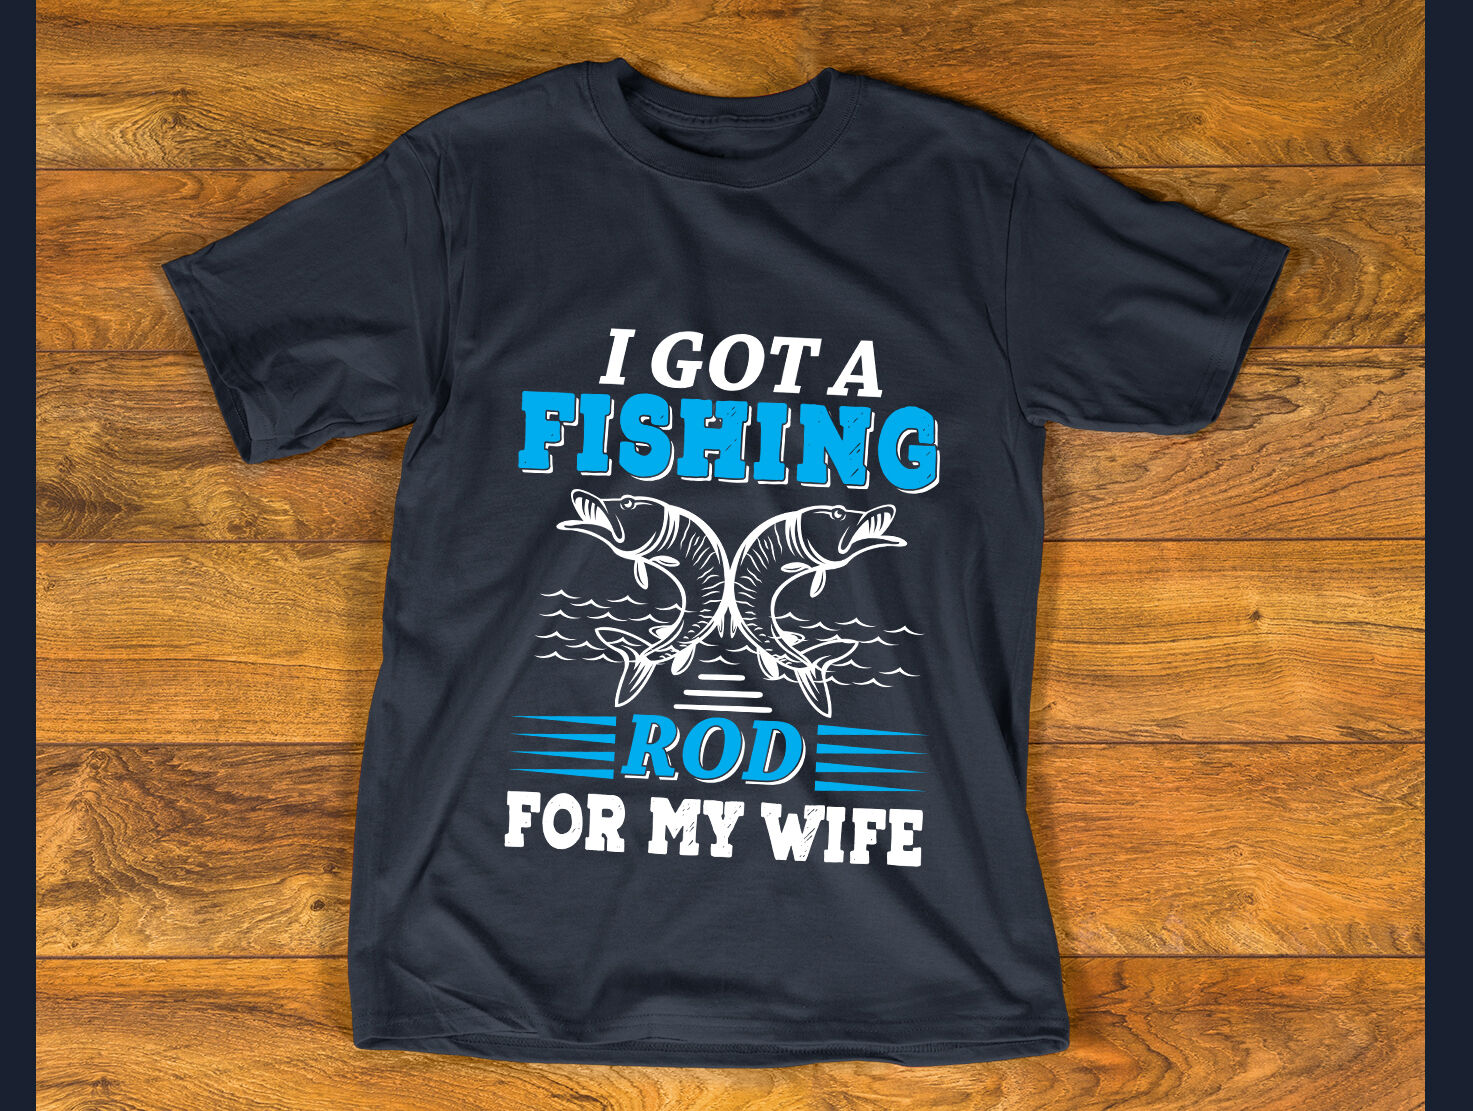 Husband And Wife For Fishing Partners Life T Shirt Design,Fishing Vector T  Shirt Design,Fishing T Shirt Design Bundle,Fishing T Shirt Bundle - Buy  t-shirt designs